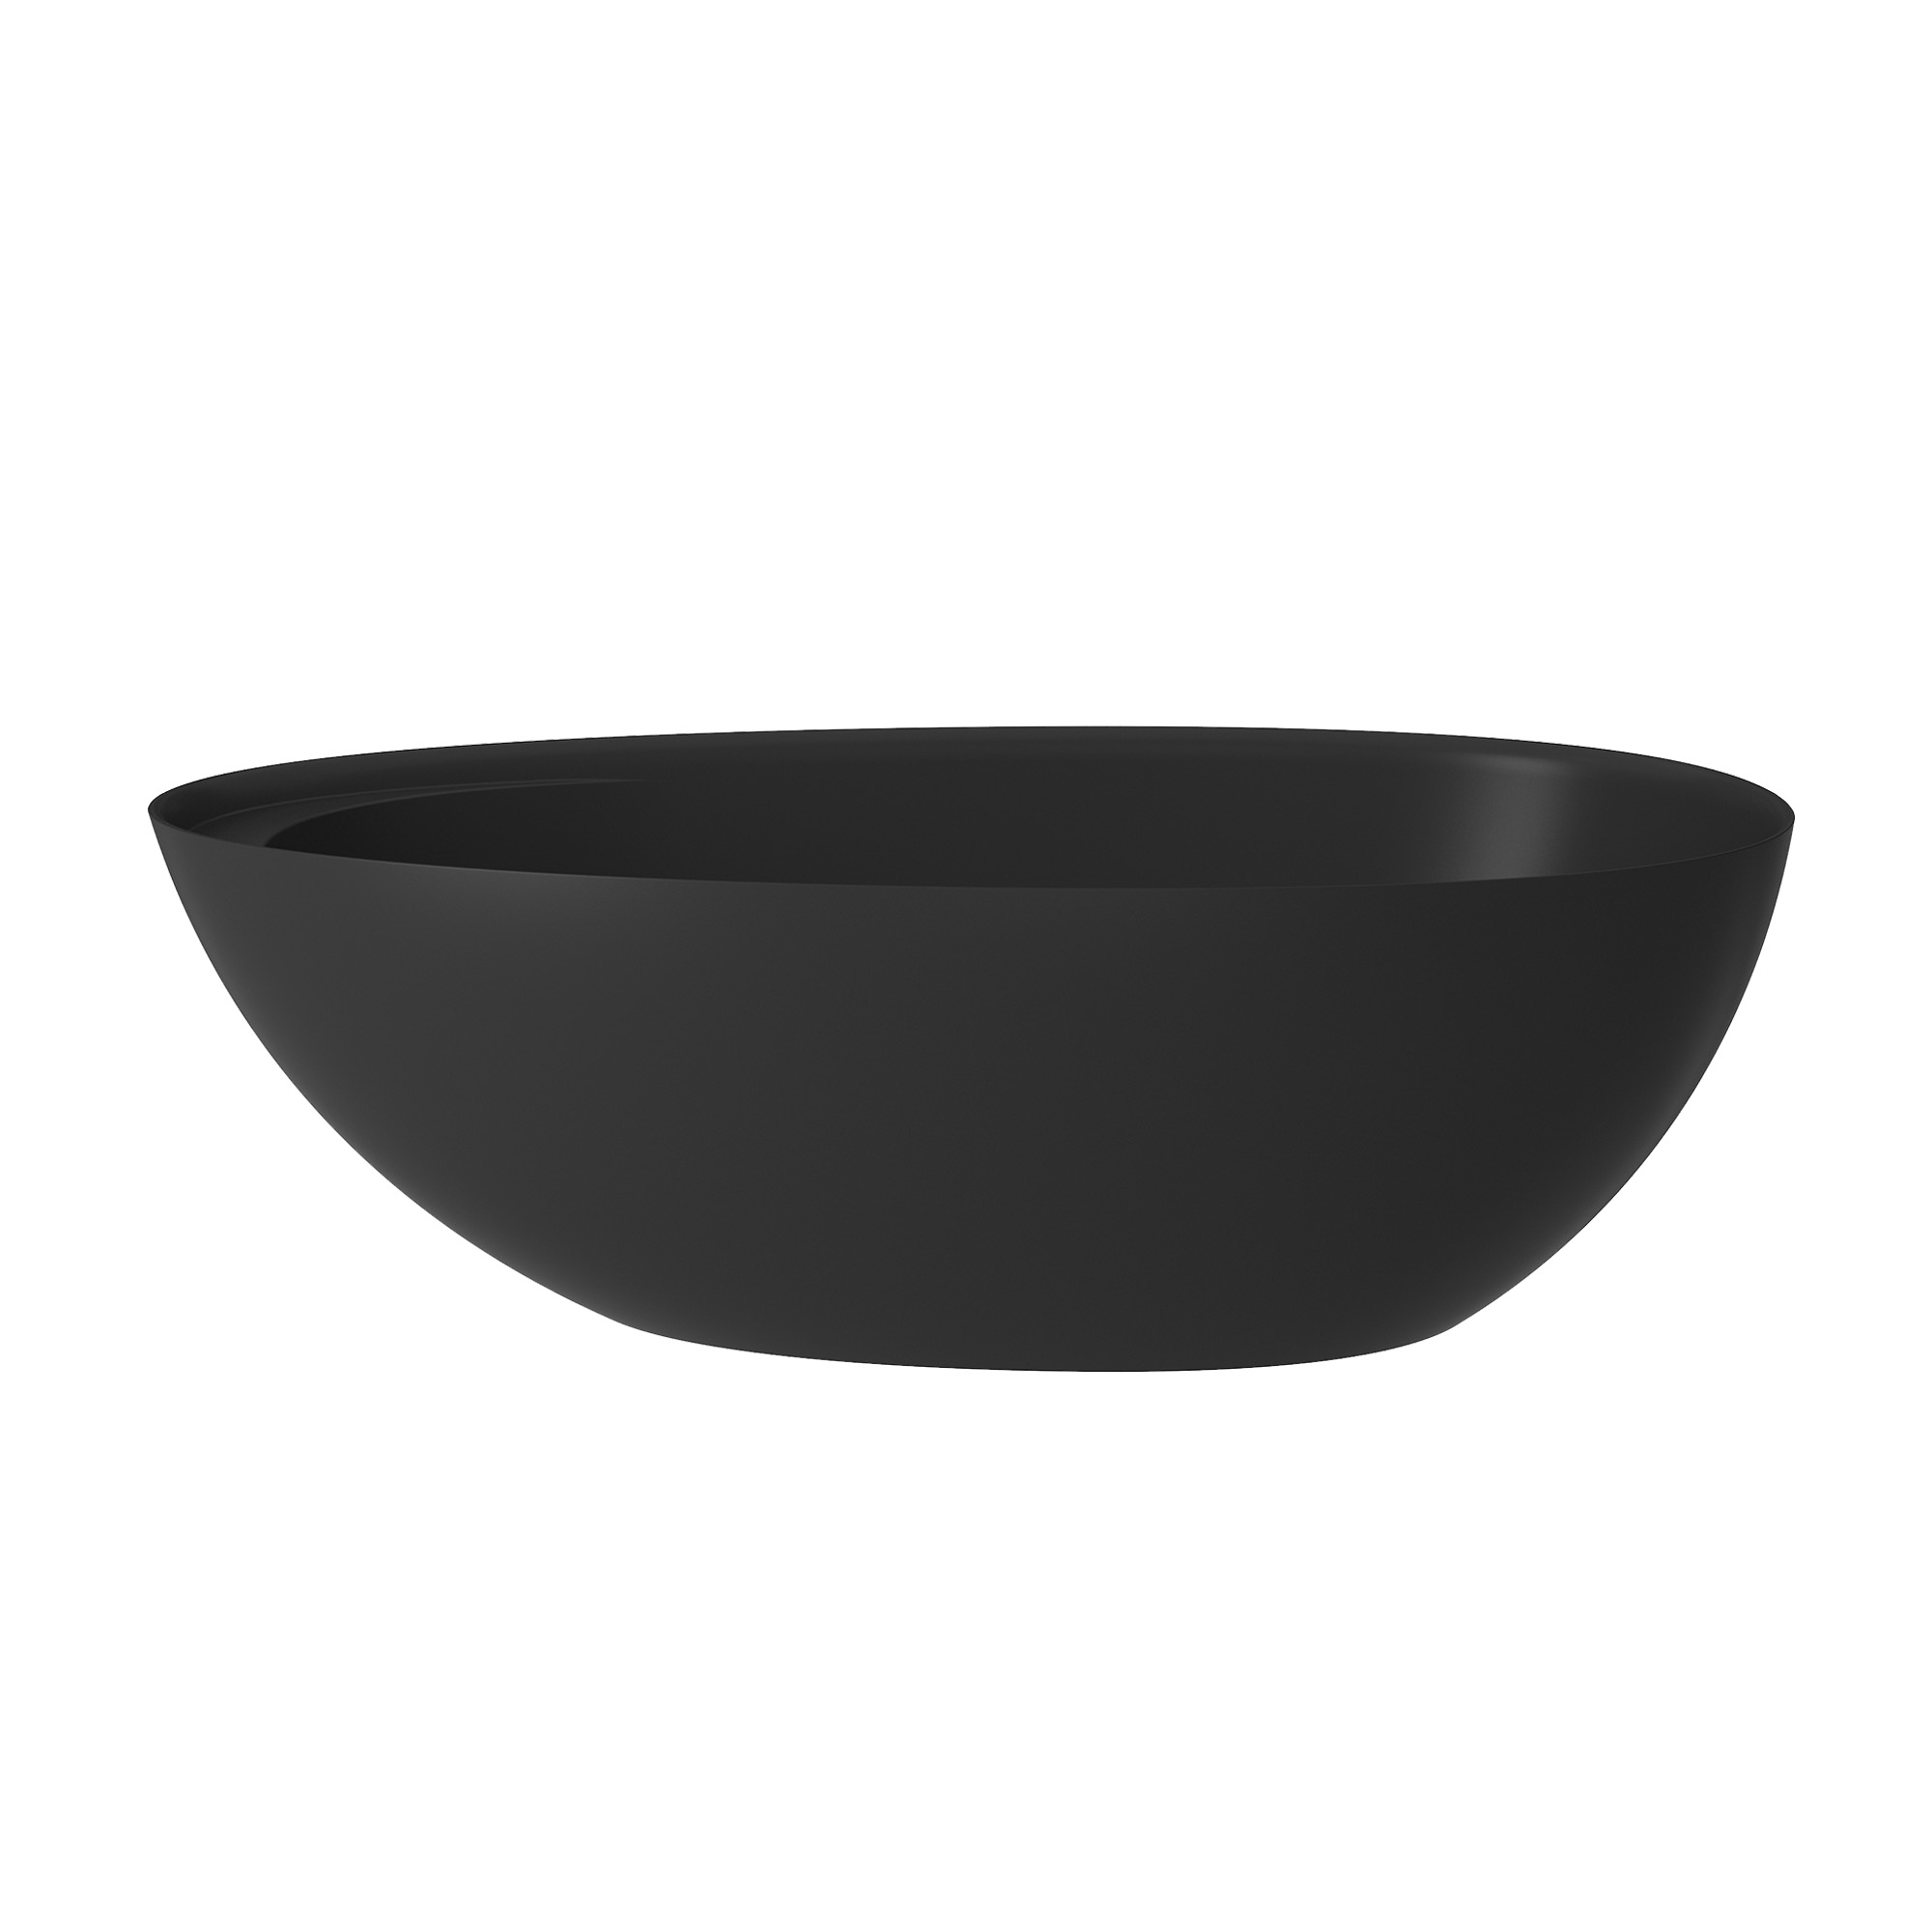 CASAINC 67" Solid Surface Resin Bathtubs, Egg Shell Shaped Stone Resin Freestanding Tubs with Overflow and Drain, Matte Black, Matte Grey, Matte White